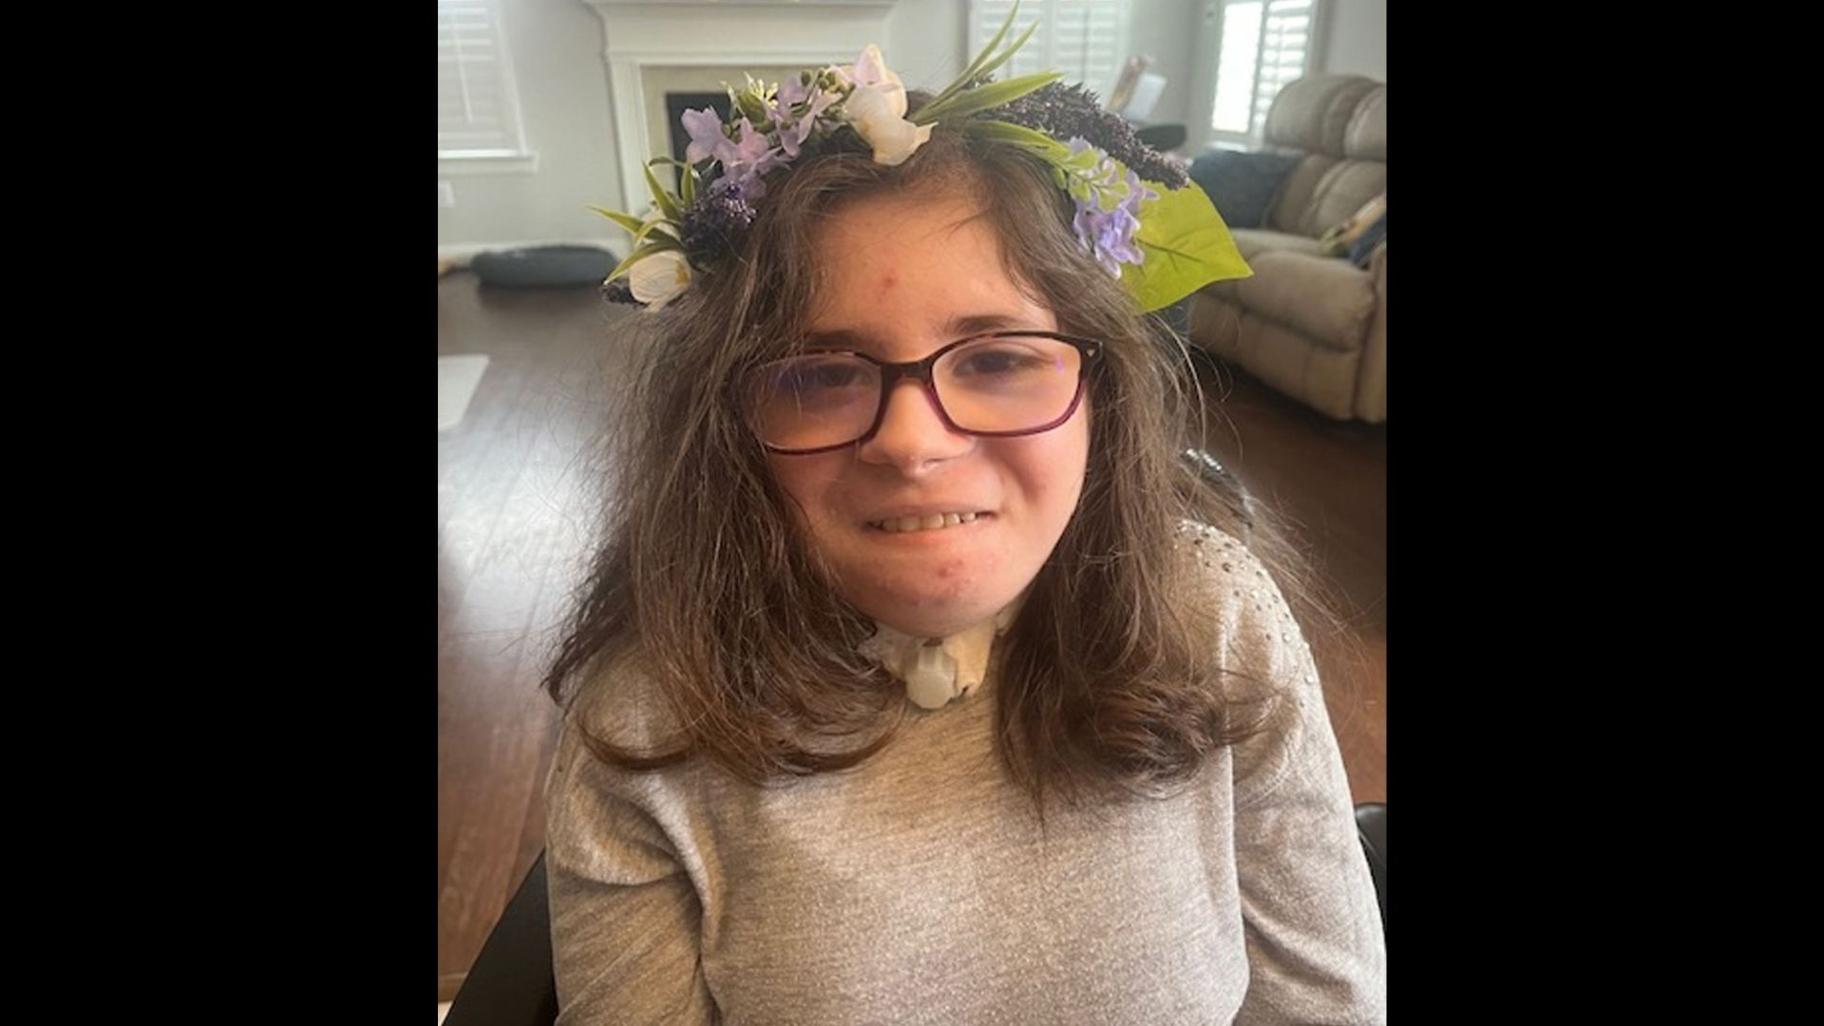 13-year-old Abby needs a daily asthma medication to help her breathe, but her options have become pricier and harder to find this year. (Julie Leach via CNN Newsource)